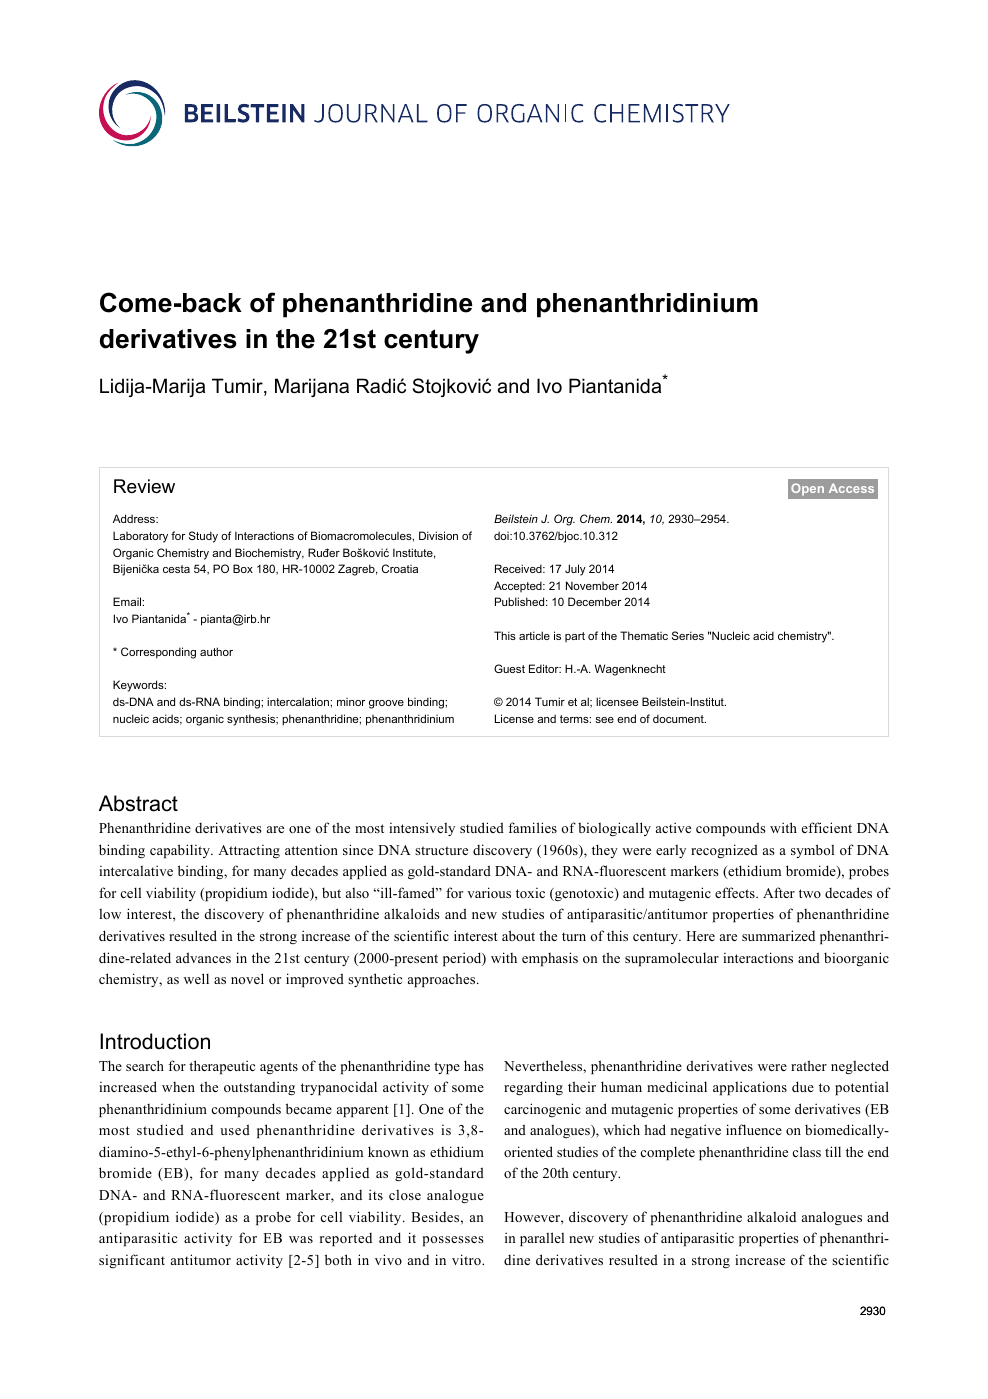 Come Back Of Phenanthridine And Phenanthridinium Derivatives In The 21st Century Topic Of Research Paper In Chemical Sciences Download Scholarly Article Pdf And Read For Free On Cyberleninka Open Science Hub